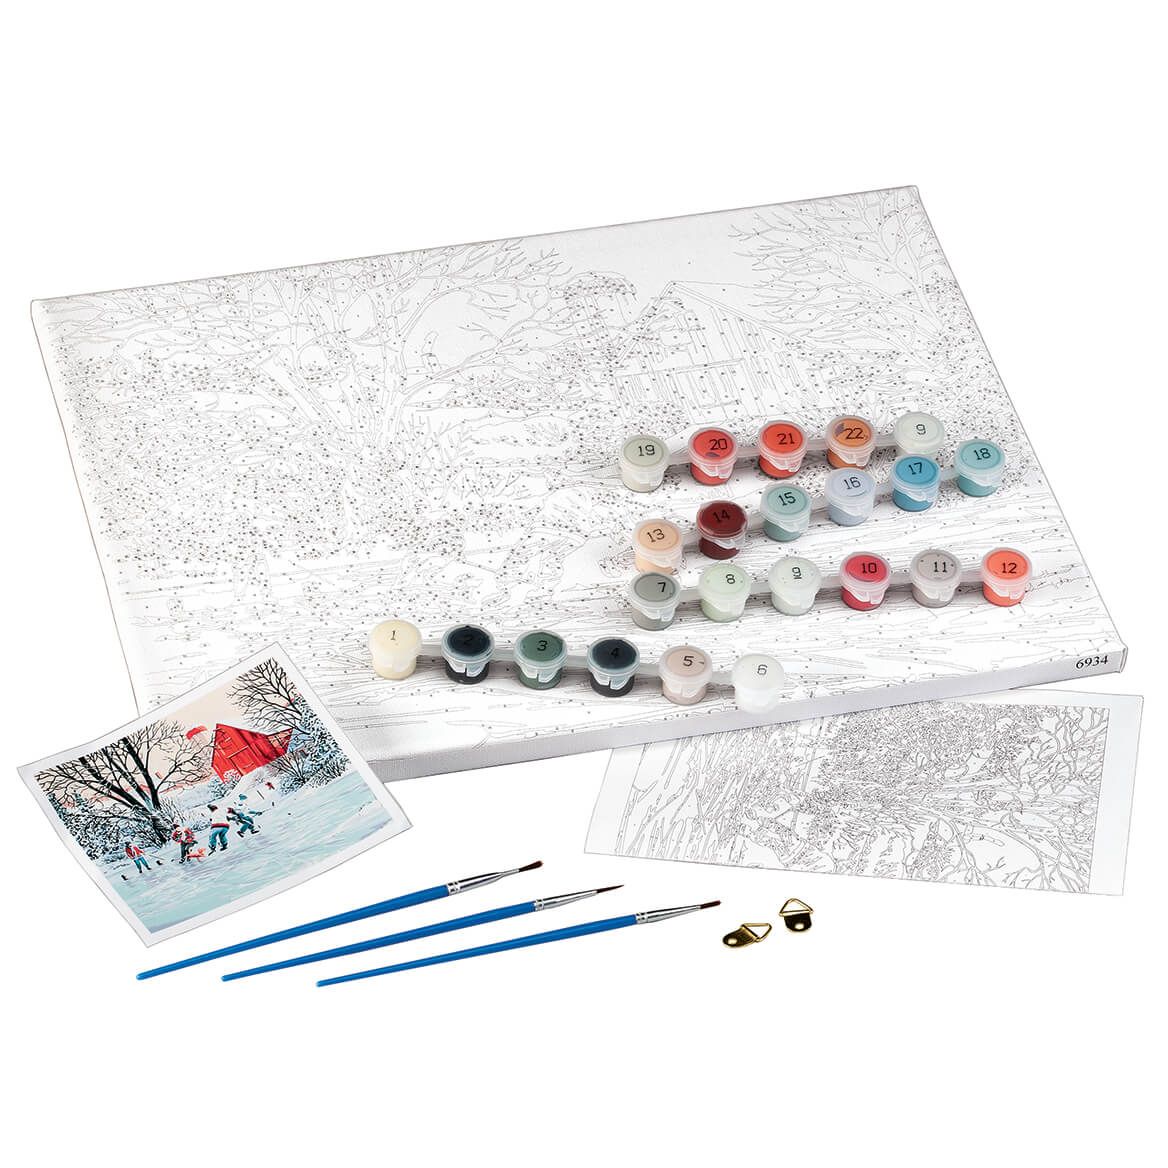 Winter-Themed DIY Paint-By-Number Set + '-' + 375008